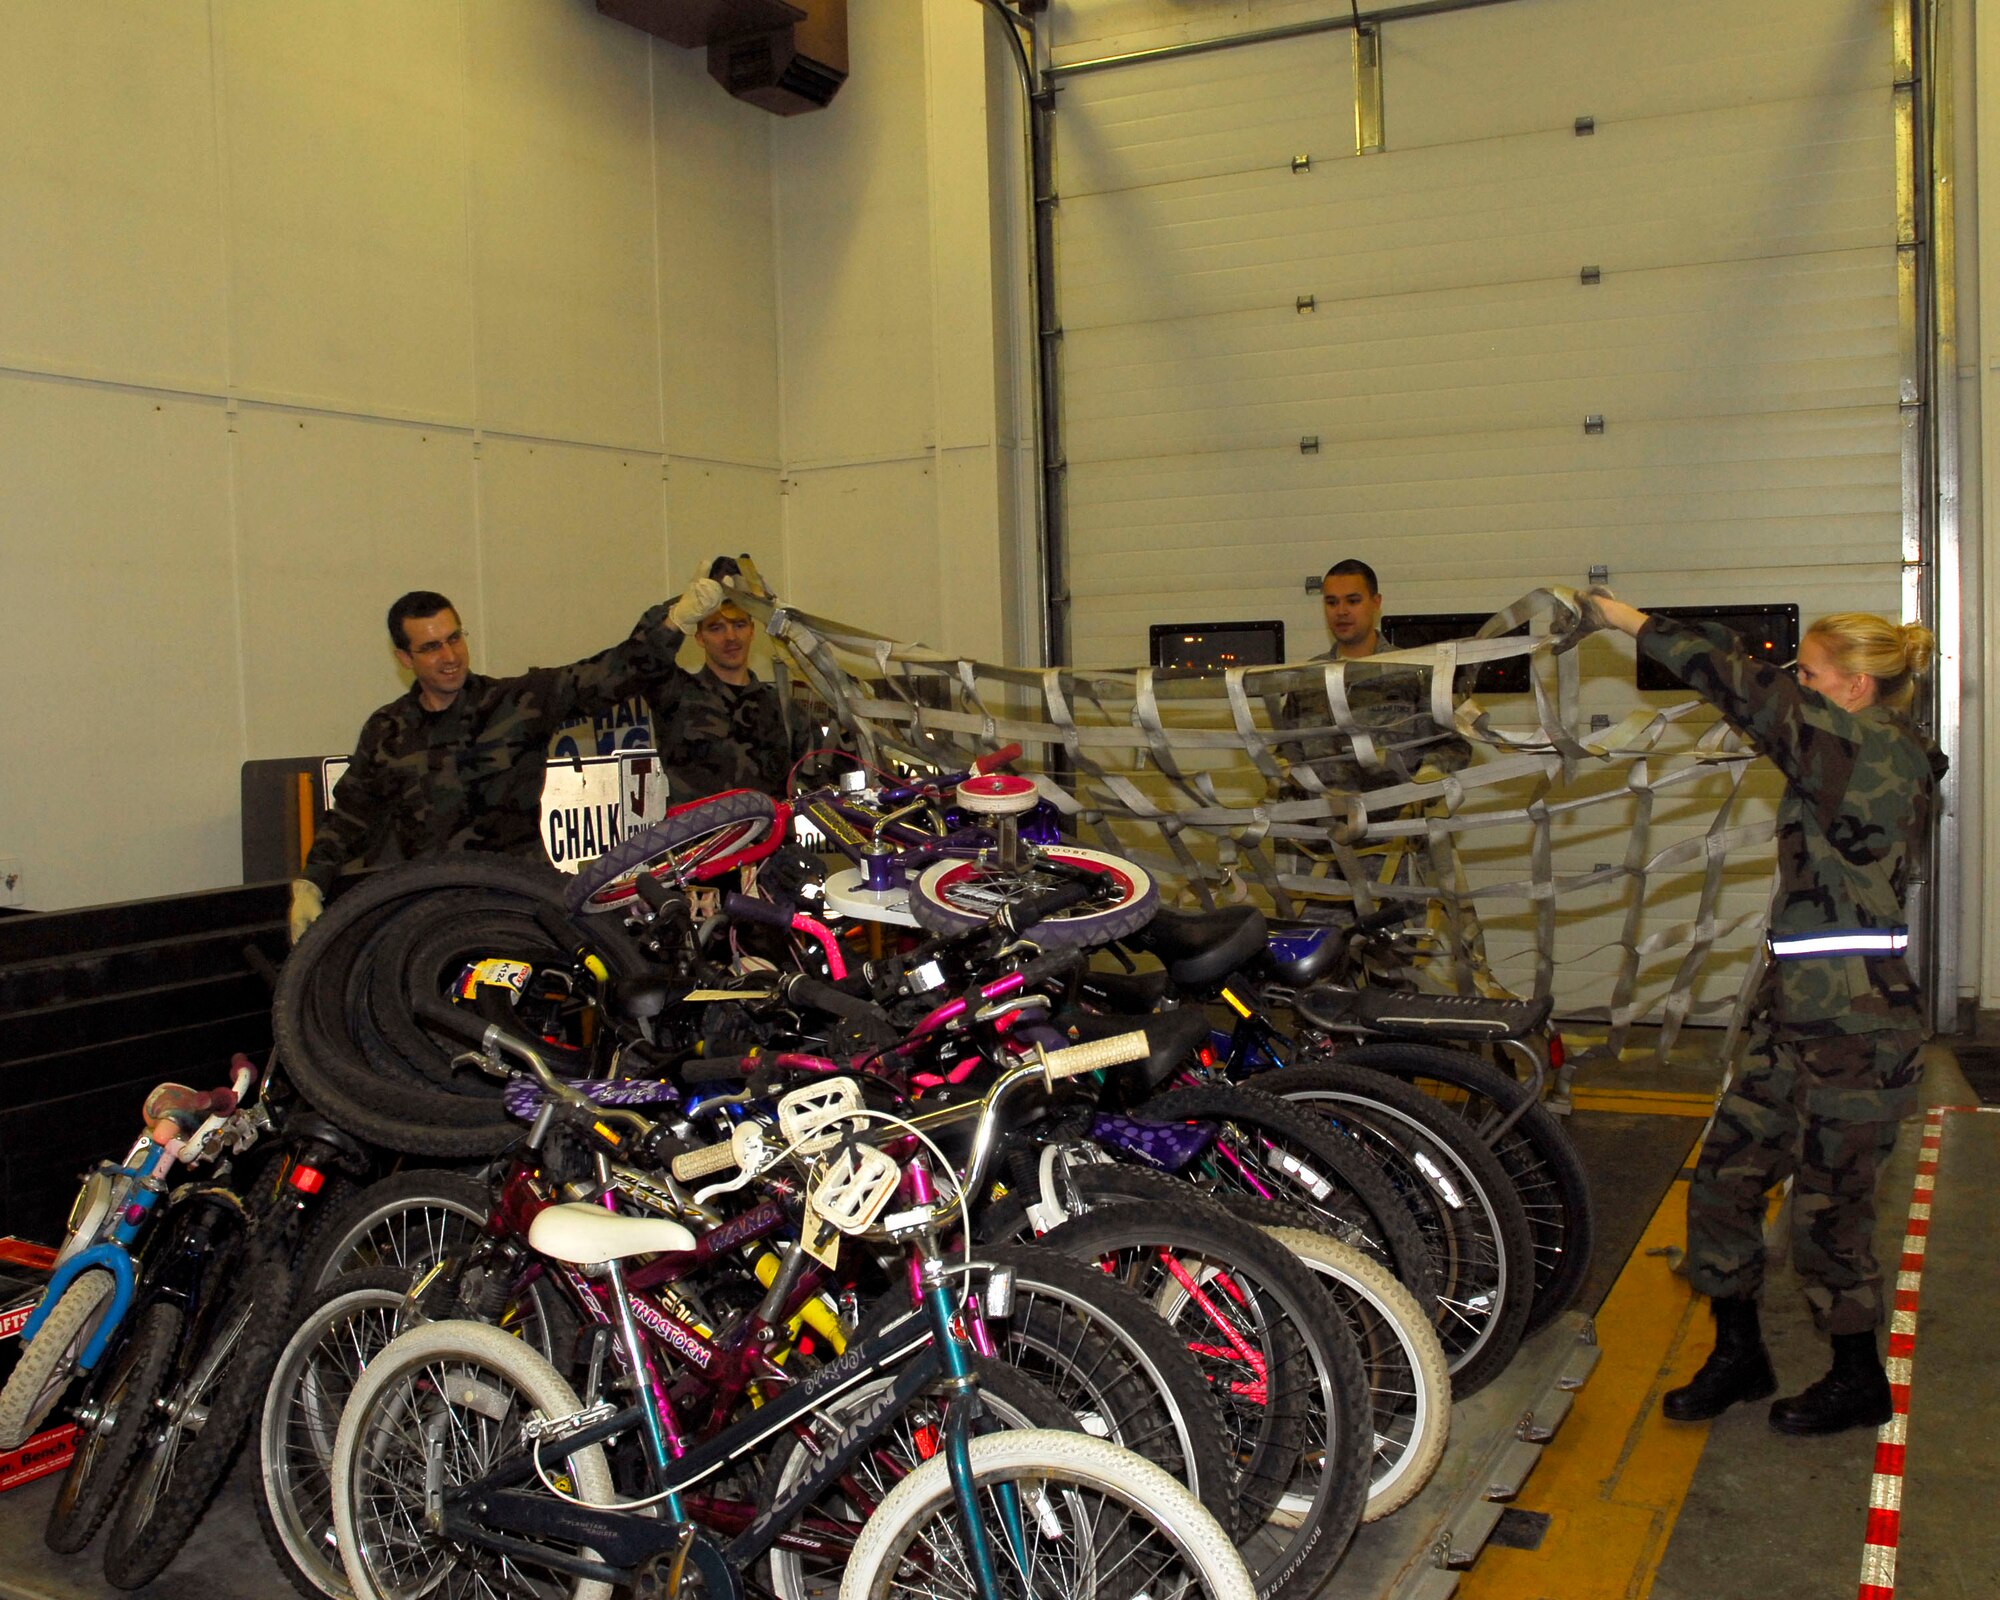 (Left to right) Alaska Air Guardsmen Staff Sgt. Woody Miller, Senior Airman John Darnall, Senior Airman Ryan Pierce and Tech. Sgt. Summer Rehak from the 176th Logistics Readiness Squadron pulls a top net over a pallet of refurbished bicycles on December 6, 2009. The bikes will be airlifted by the Alaska Air National Guard?s144th Airlift Squadron, to Afghanistan to be given to disadvantaged children. (Alaska Air National Guard photo by Tech. Sgt. Shannon Oleson)